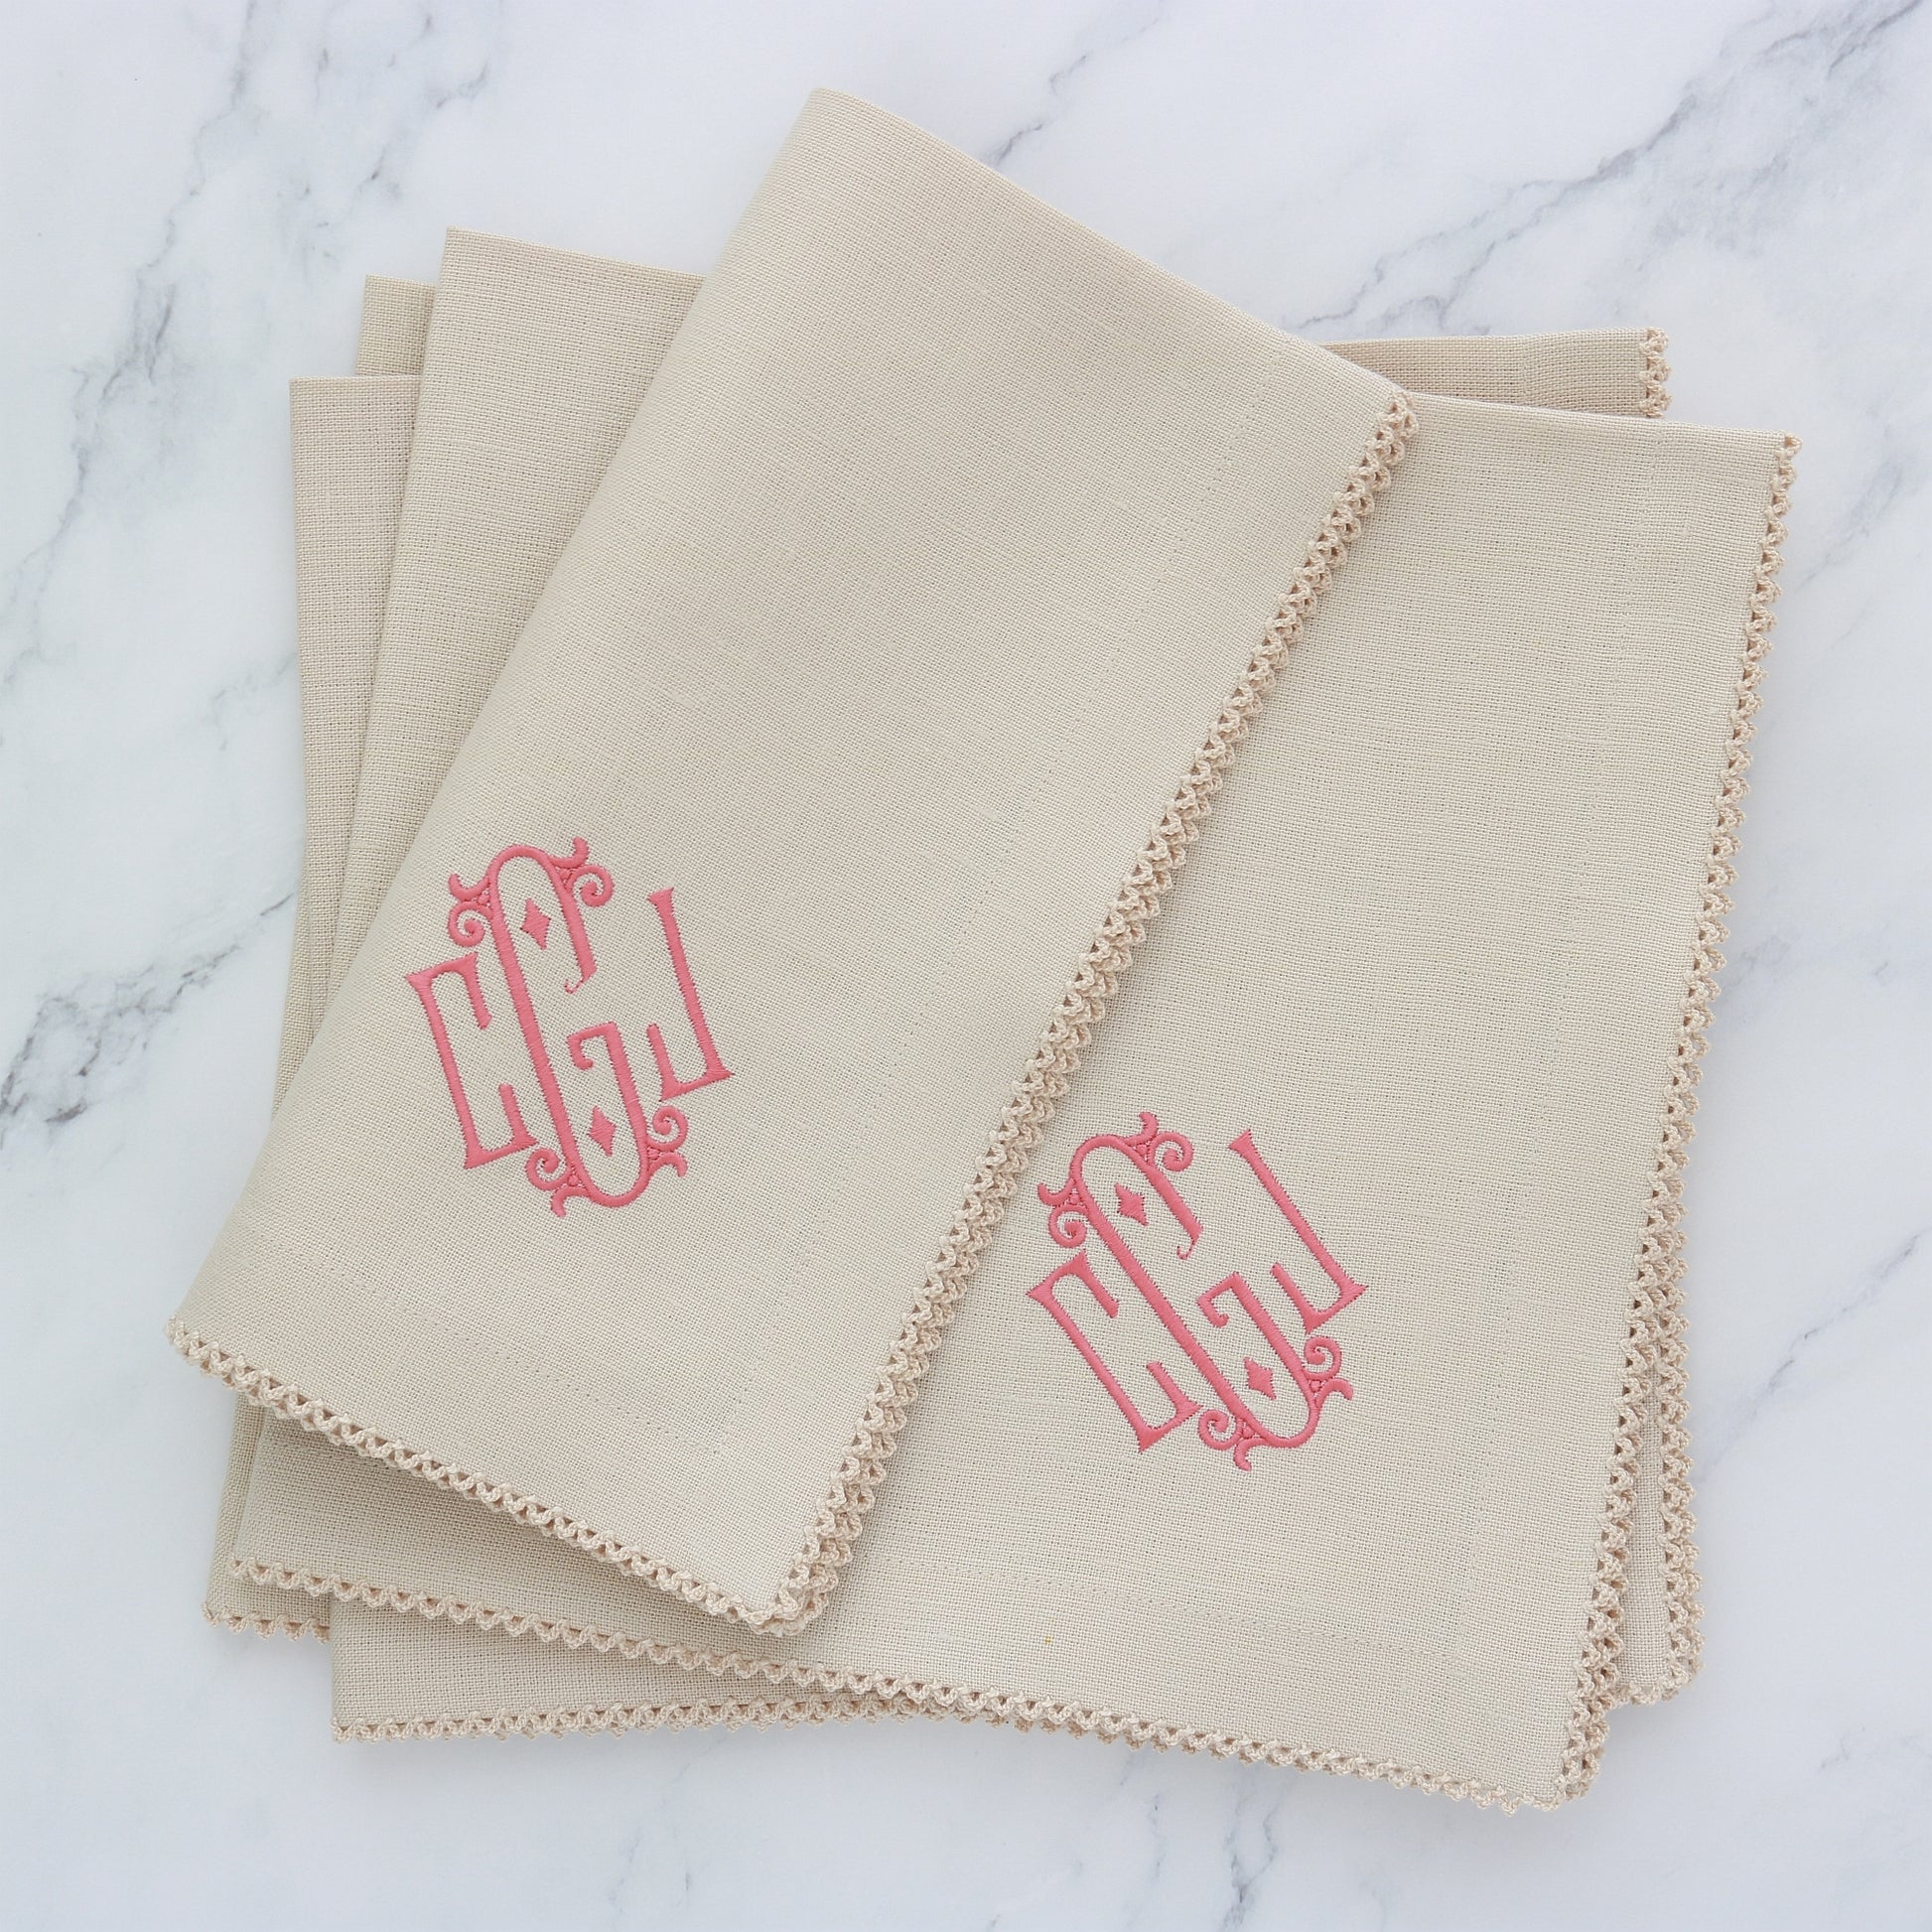 set of 4 tan linen dinner napkins with natural picot trim and monogram CGJ in dusty rose